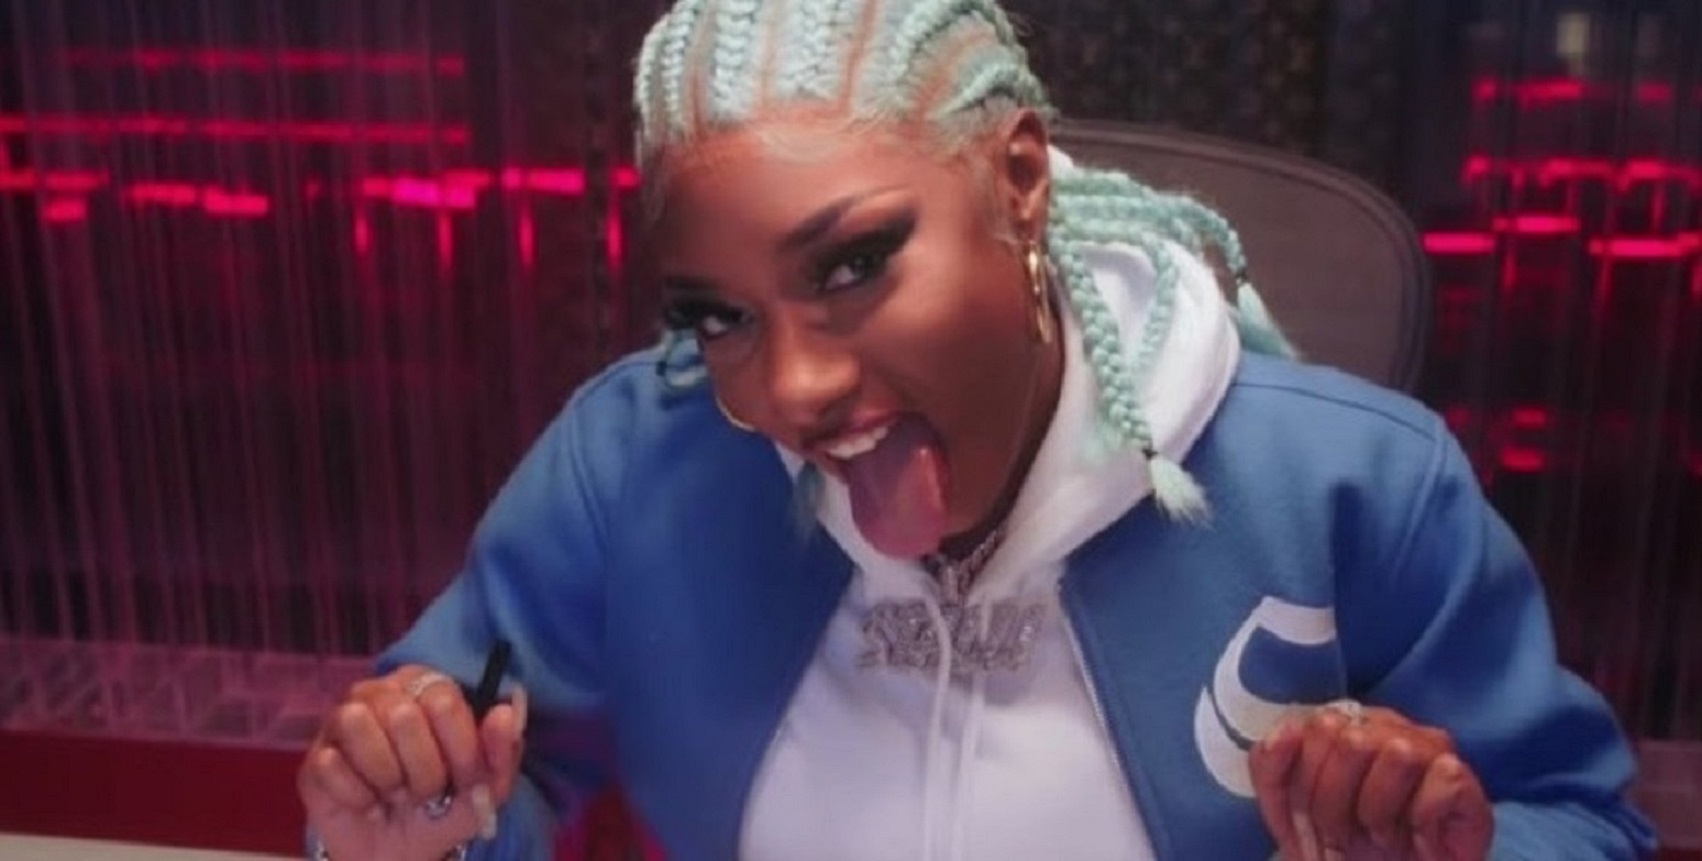 Watch: New Music Video by Megan Thee Stallion For ‘Captain Hook’